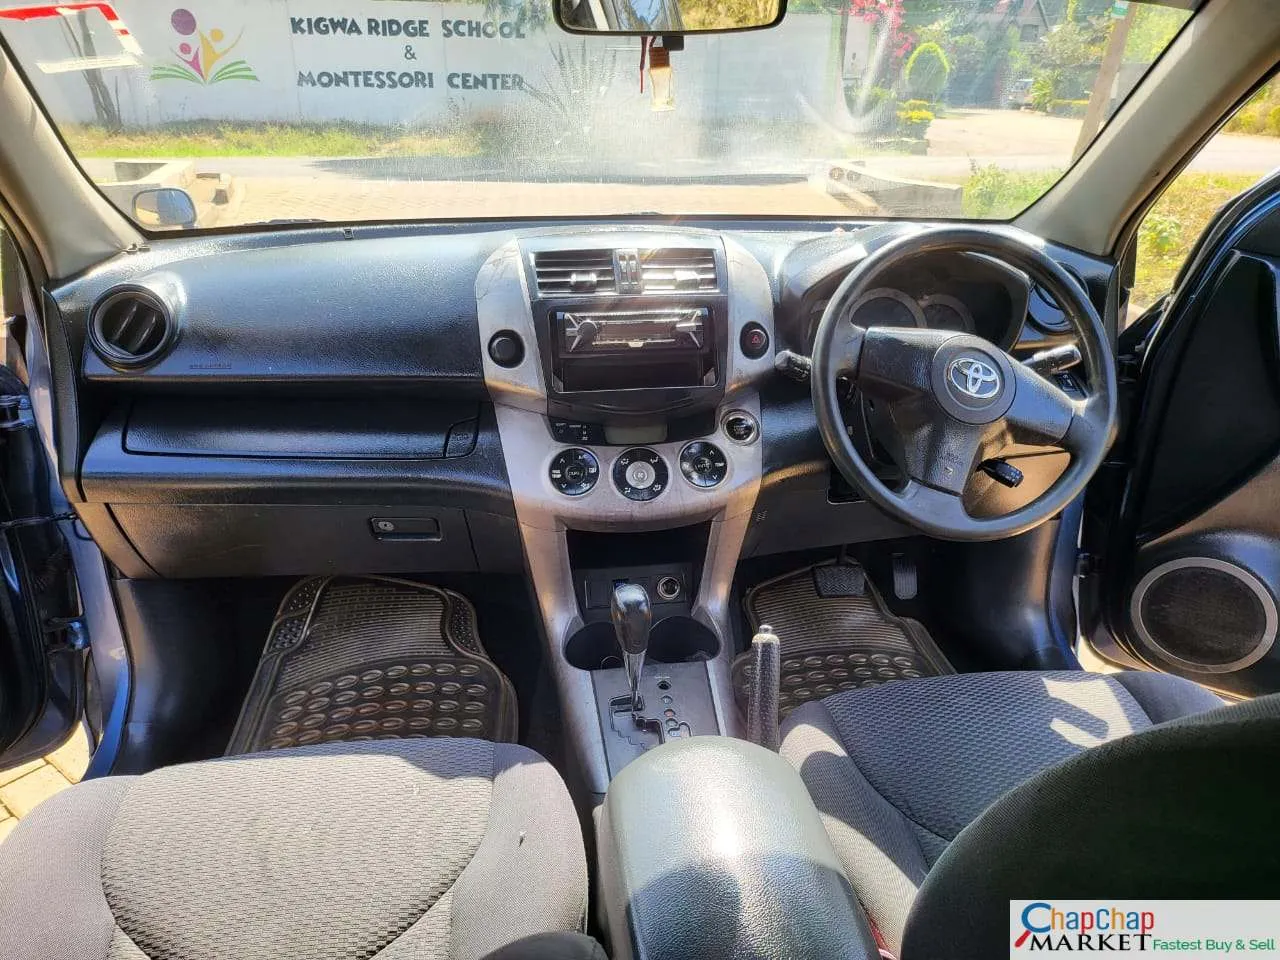 Toyota RAV4 kenya CHEAPEST You Pay 30% Deposit Trade in OK Toyota RAV4 for sale in kenya hire purchase installments EXCLUSIVE